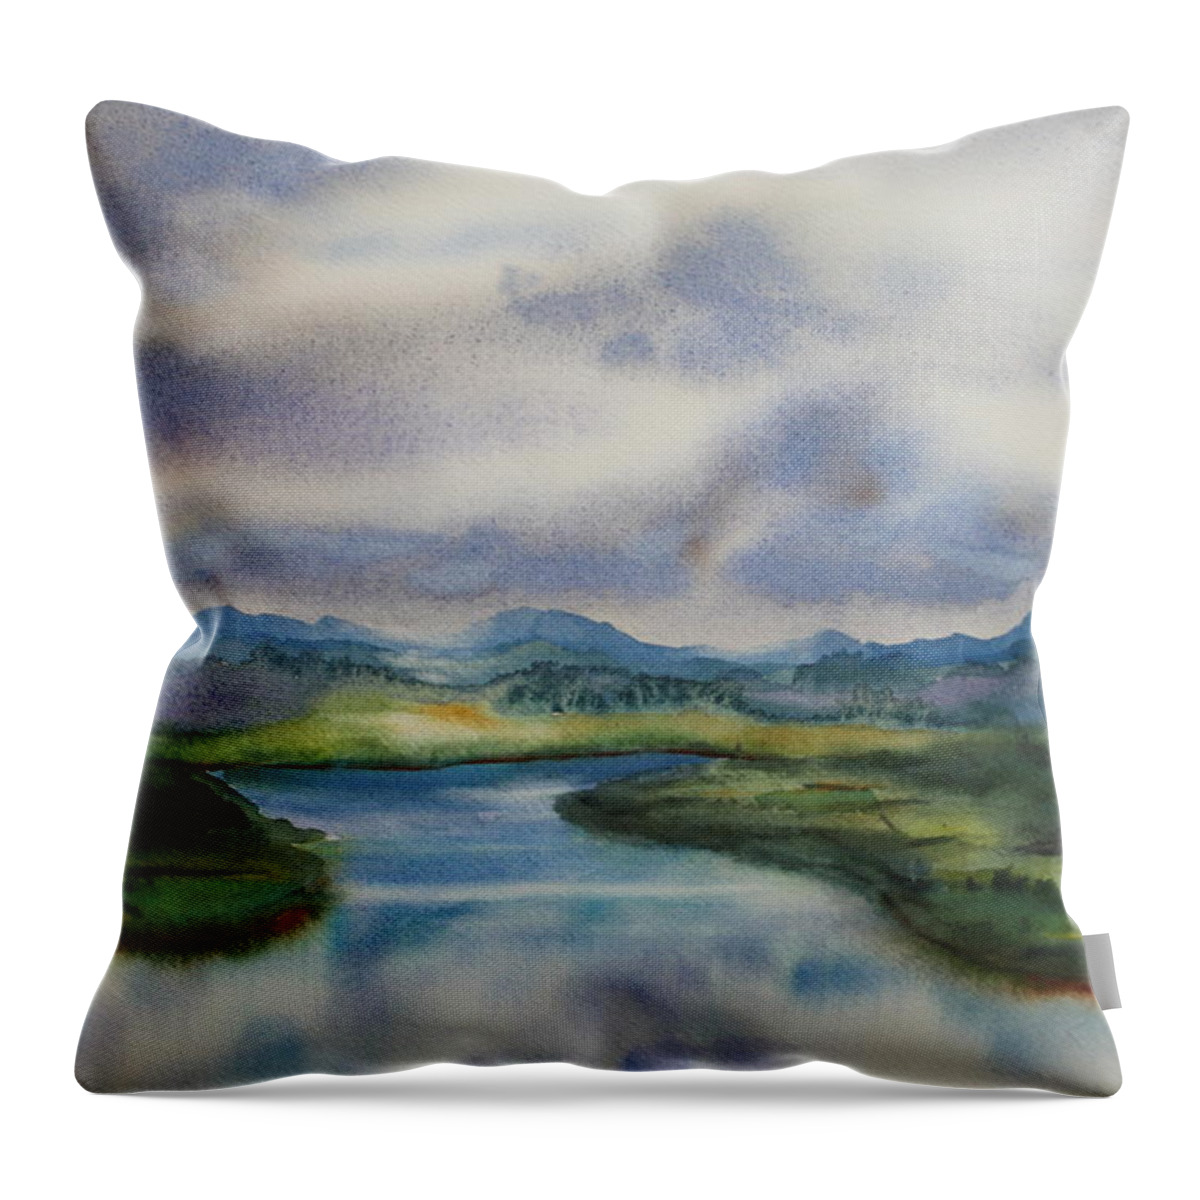 Landscape Throw Pillow featuring the painting Silver Day by Ruth Kamenev